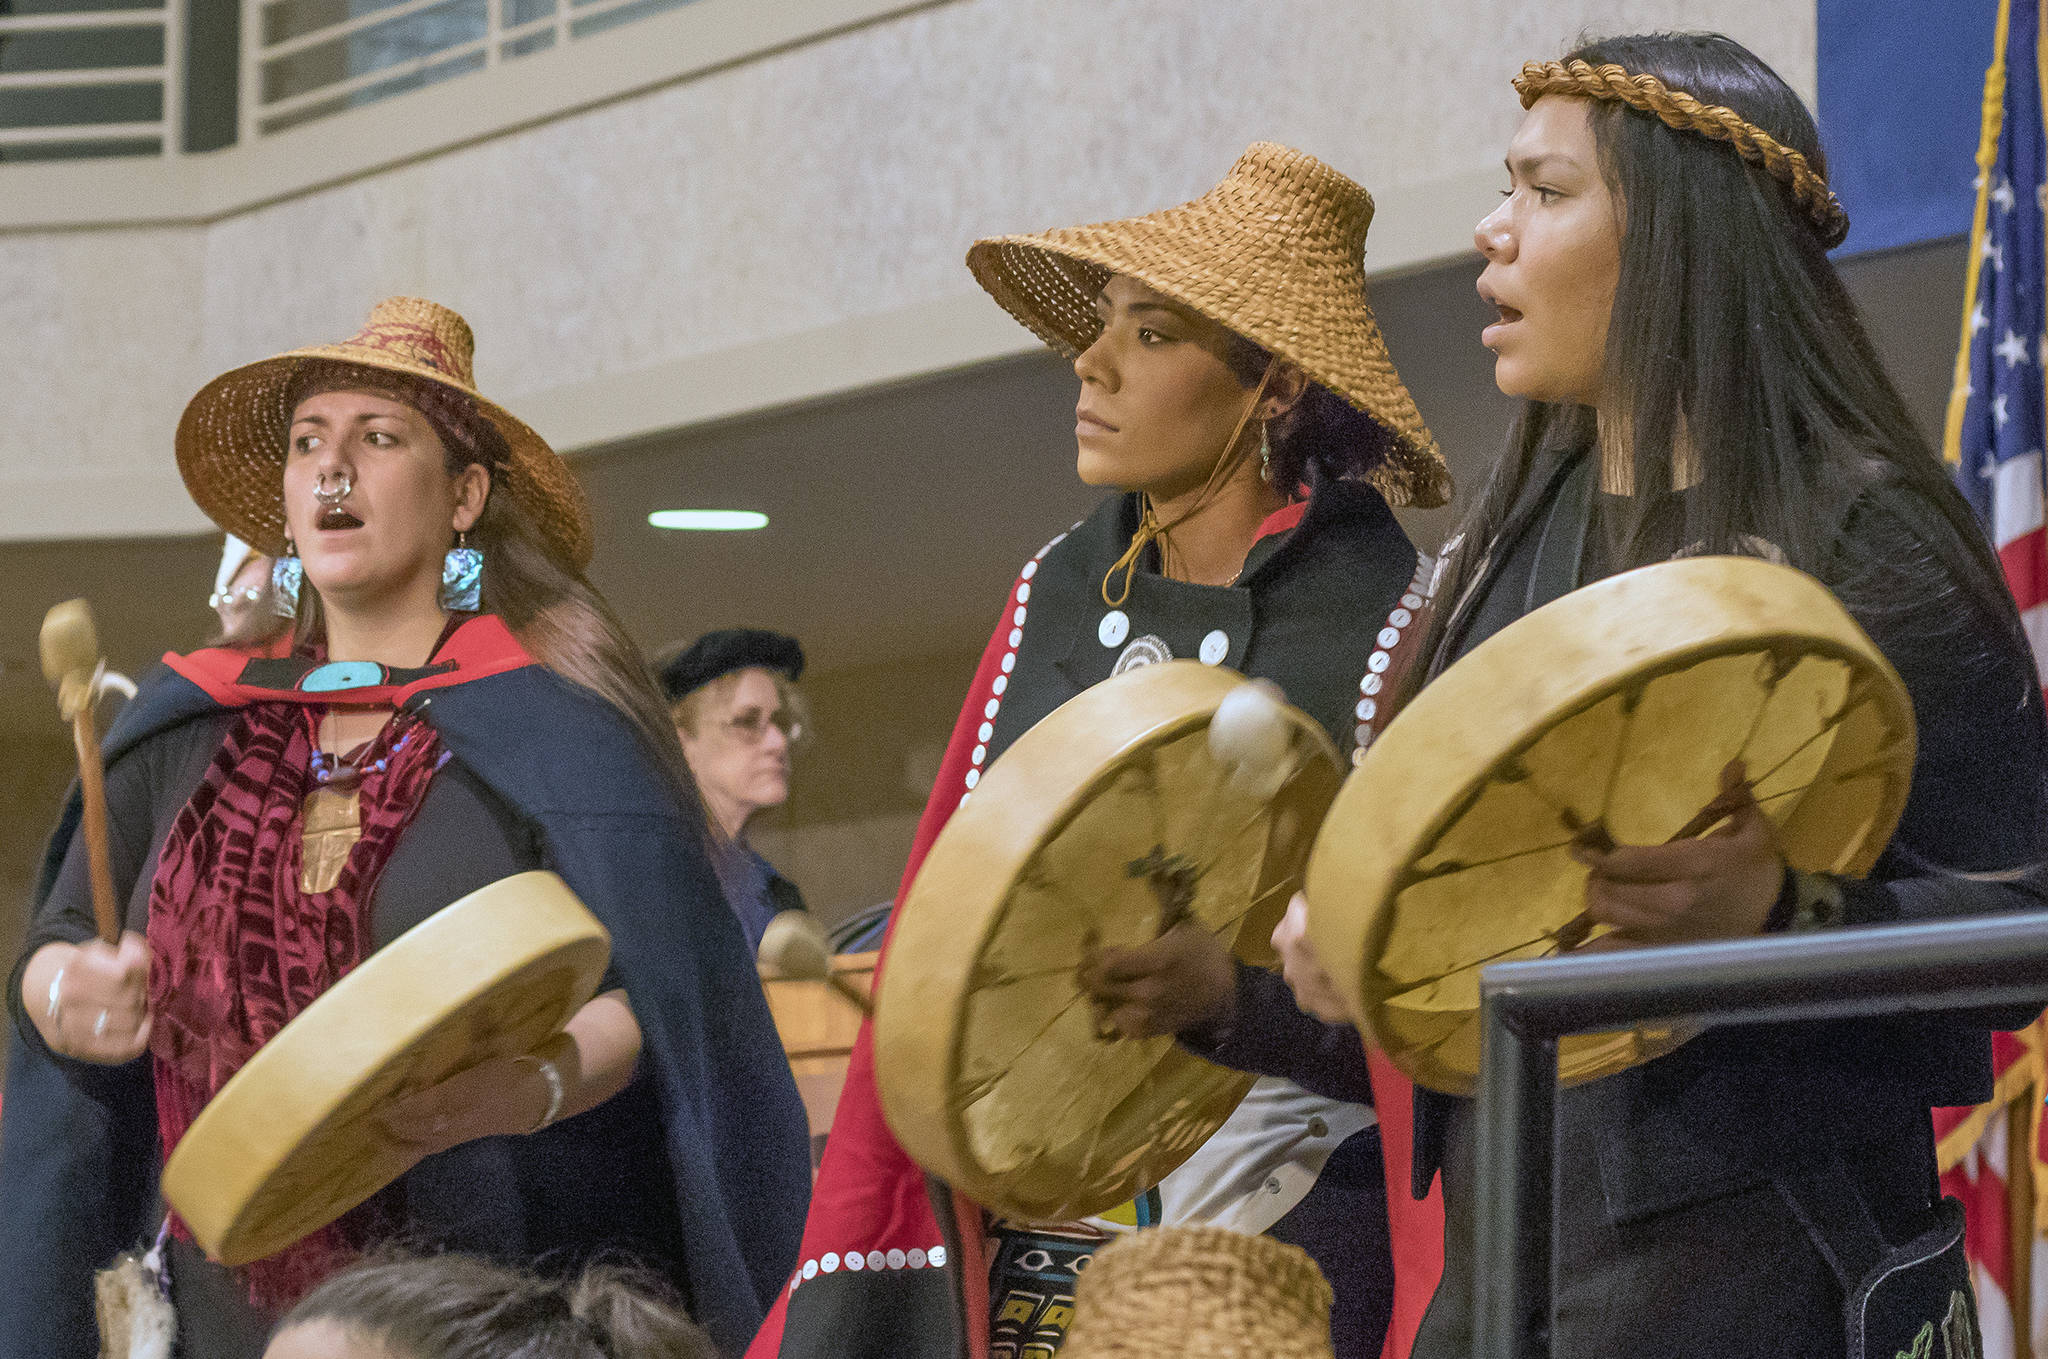 Members of the Mt. Juneau Tlingit and Wossh.ji.een dancers lead the academic procession on stage at the UAS Recreation Center during the UAS commencement ceremony on Sunday, May 5, 2019. (Erin Laughlin | For the Juneau Empire)